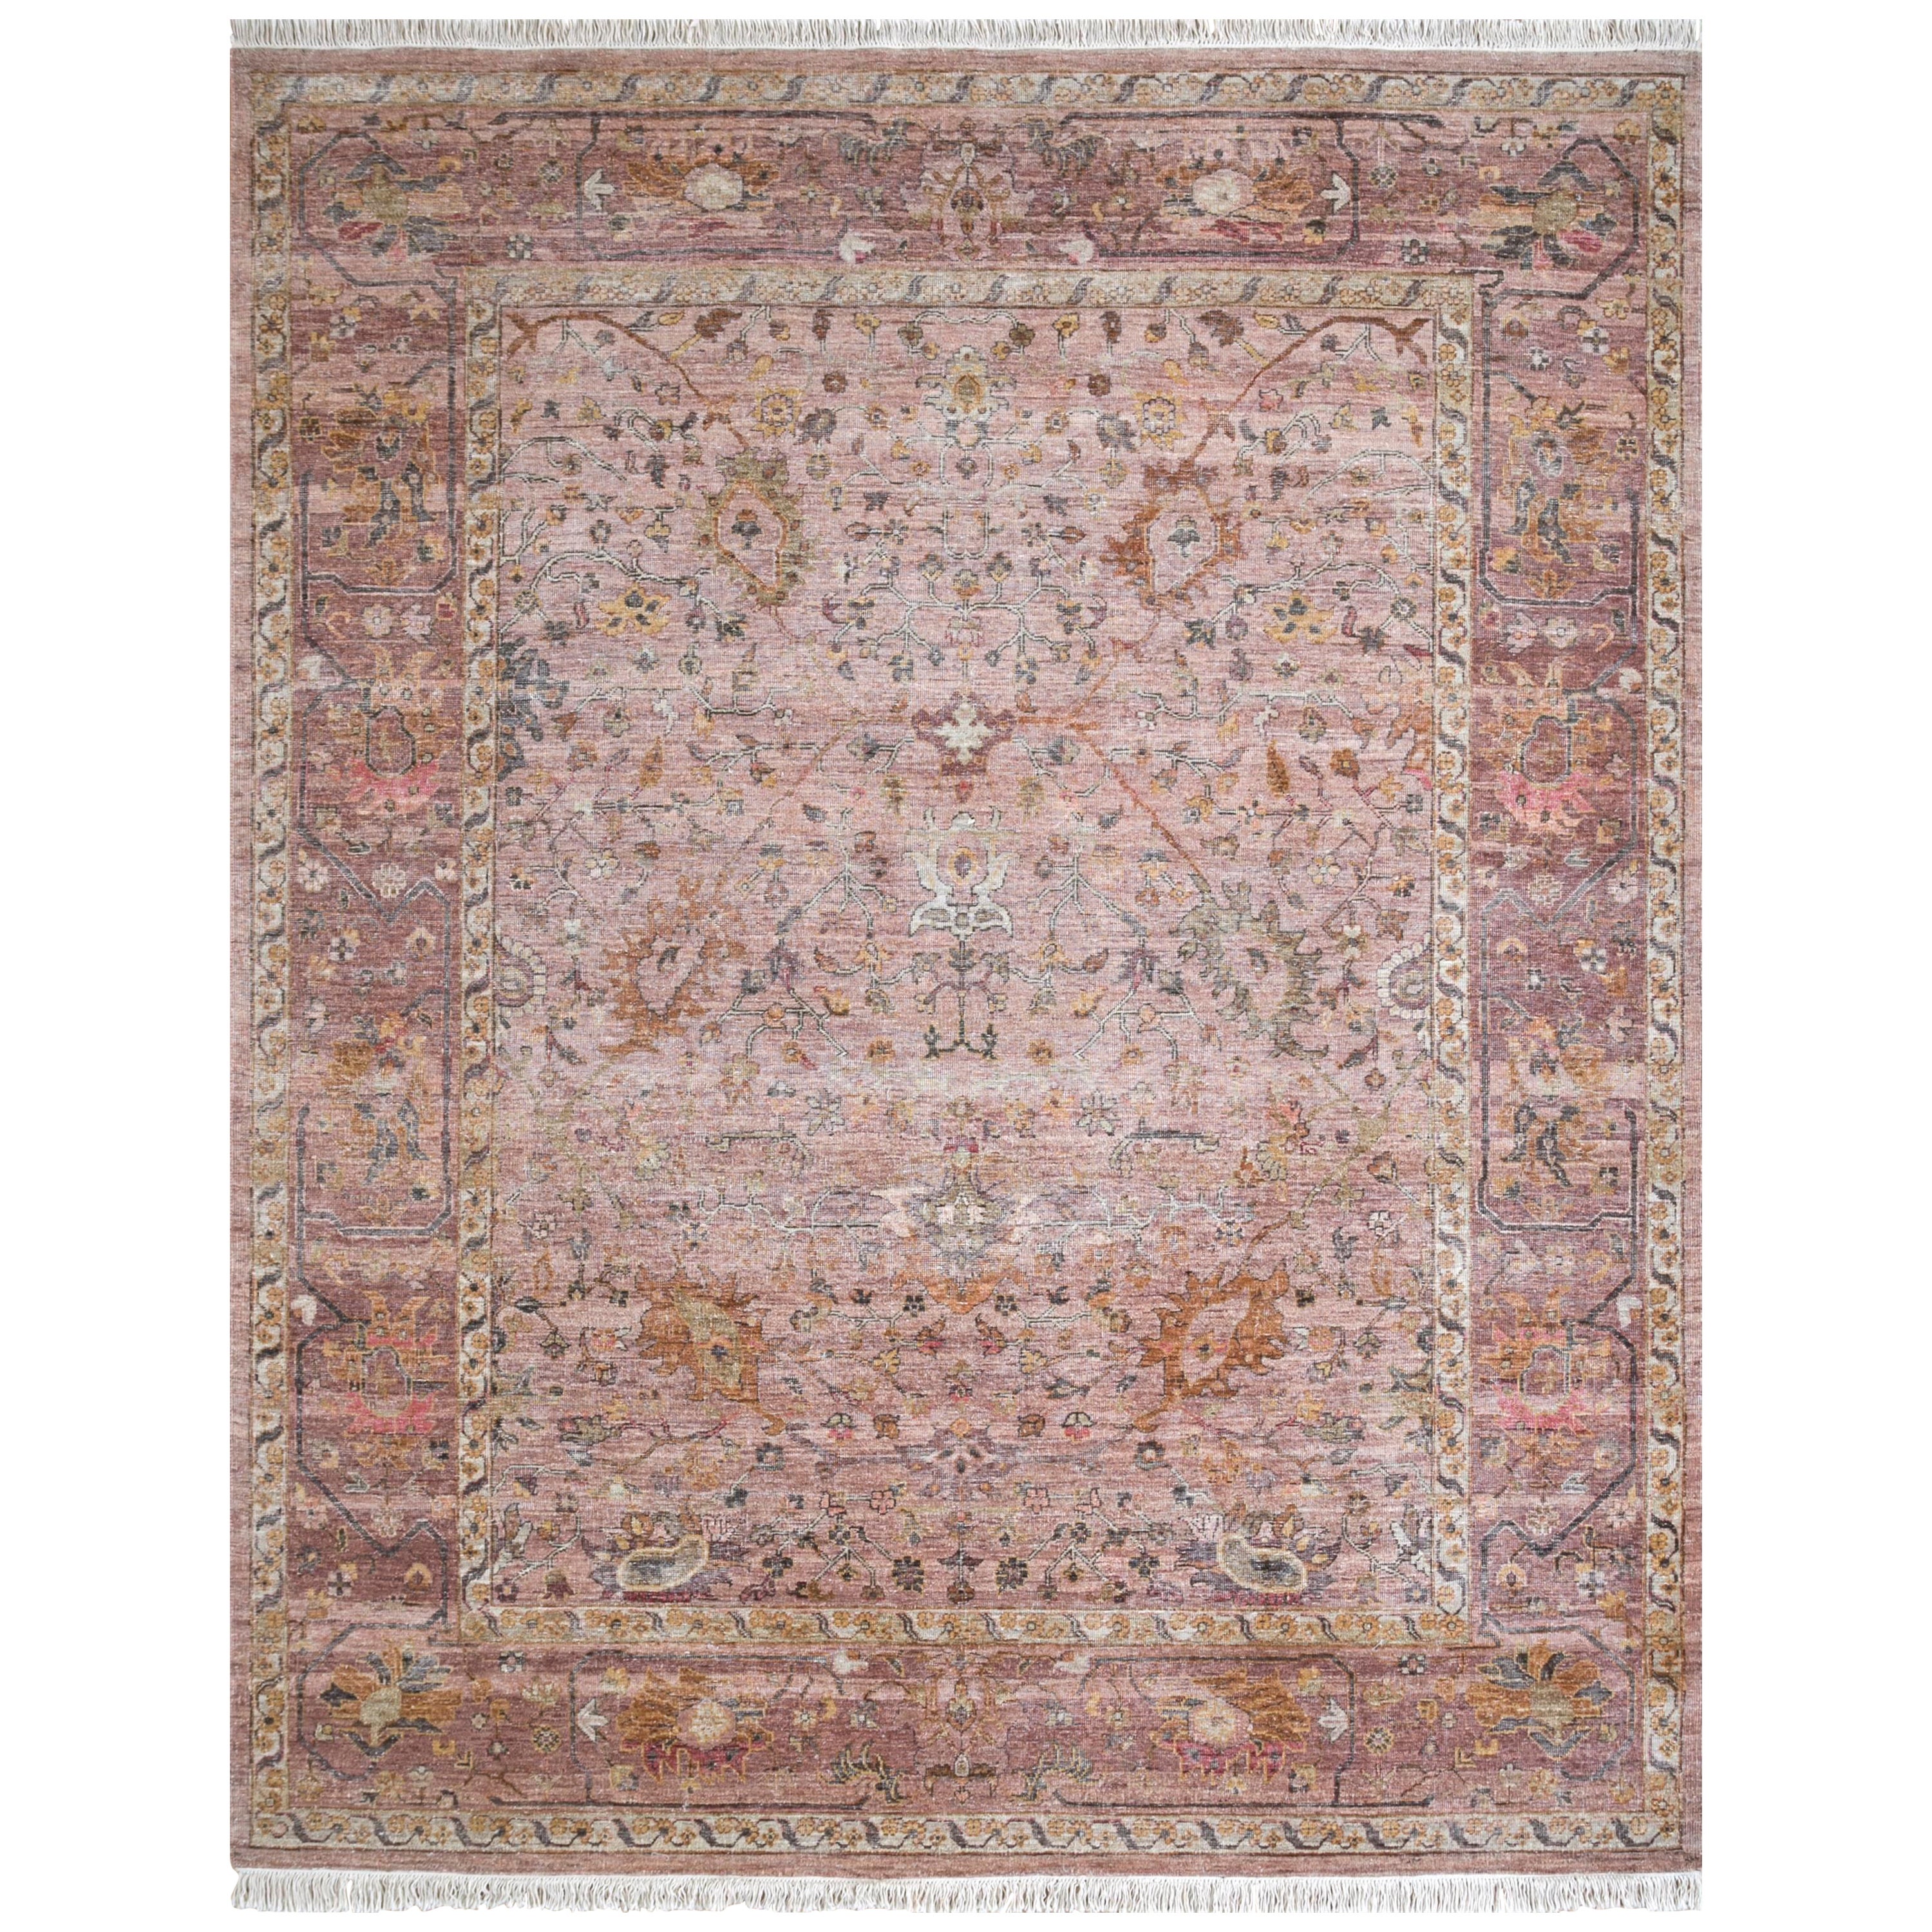 Whimsical Evolution Soft Coral & Shell Pink 240X300 Cm Handknotted Rug For Sale